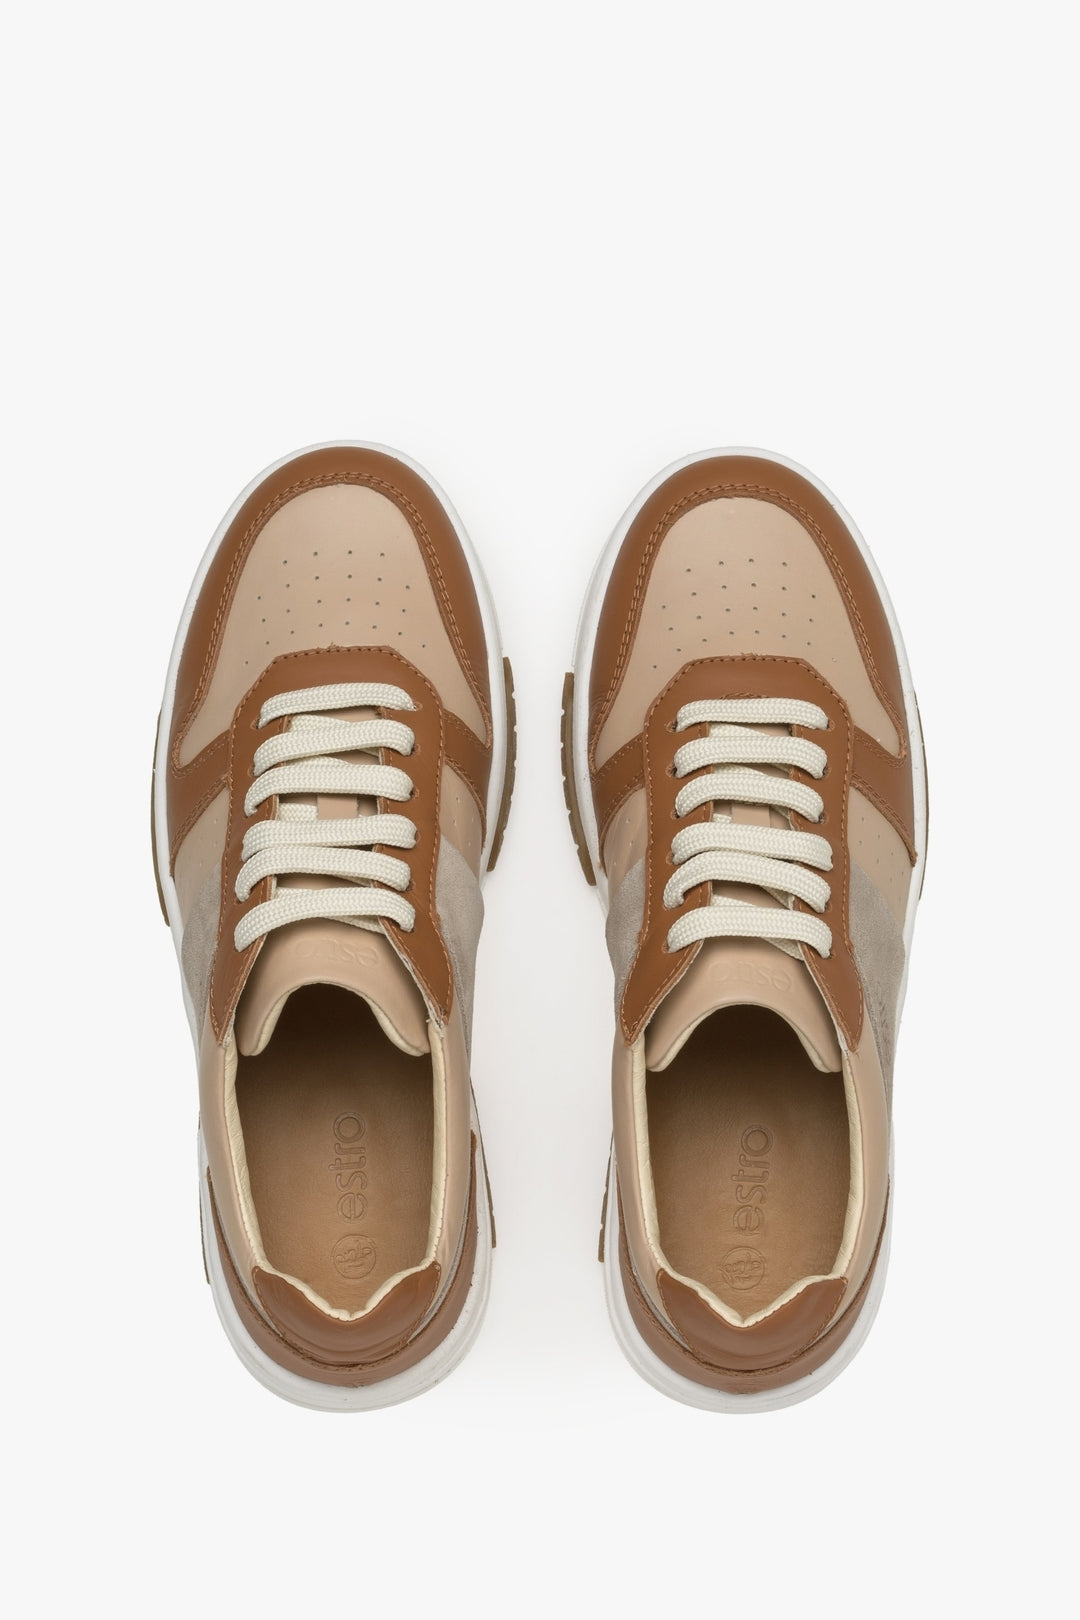 Women's brown and white sneakers made of genuine leather by Estro - top view presentation of the model.